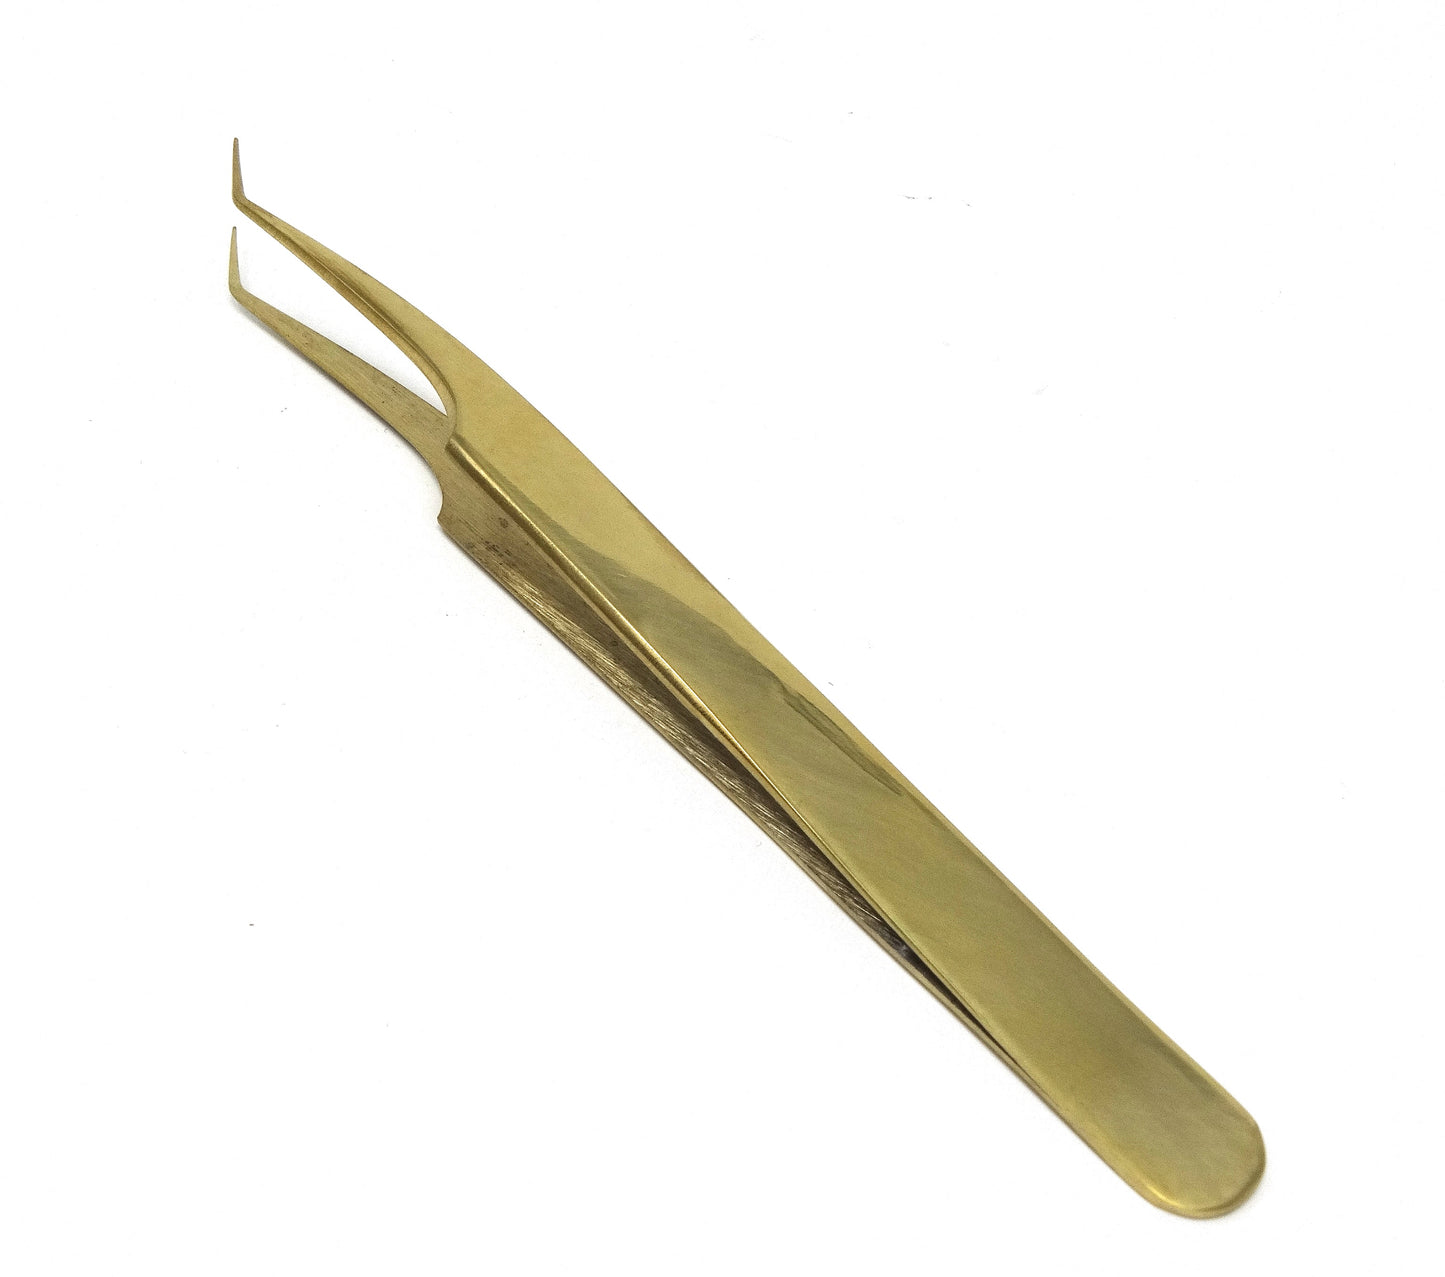 Stainless Steel Micro Surgical Forceps Tweezers A Type Angled, Gold Plated, Fine Point, Premium Quality